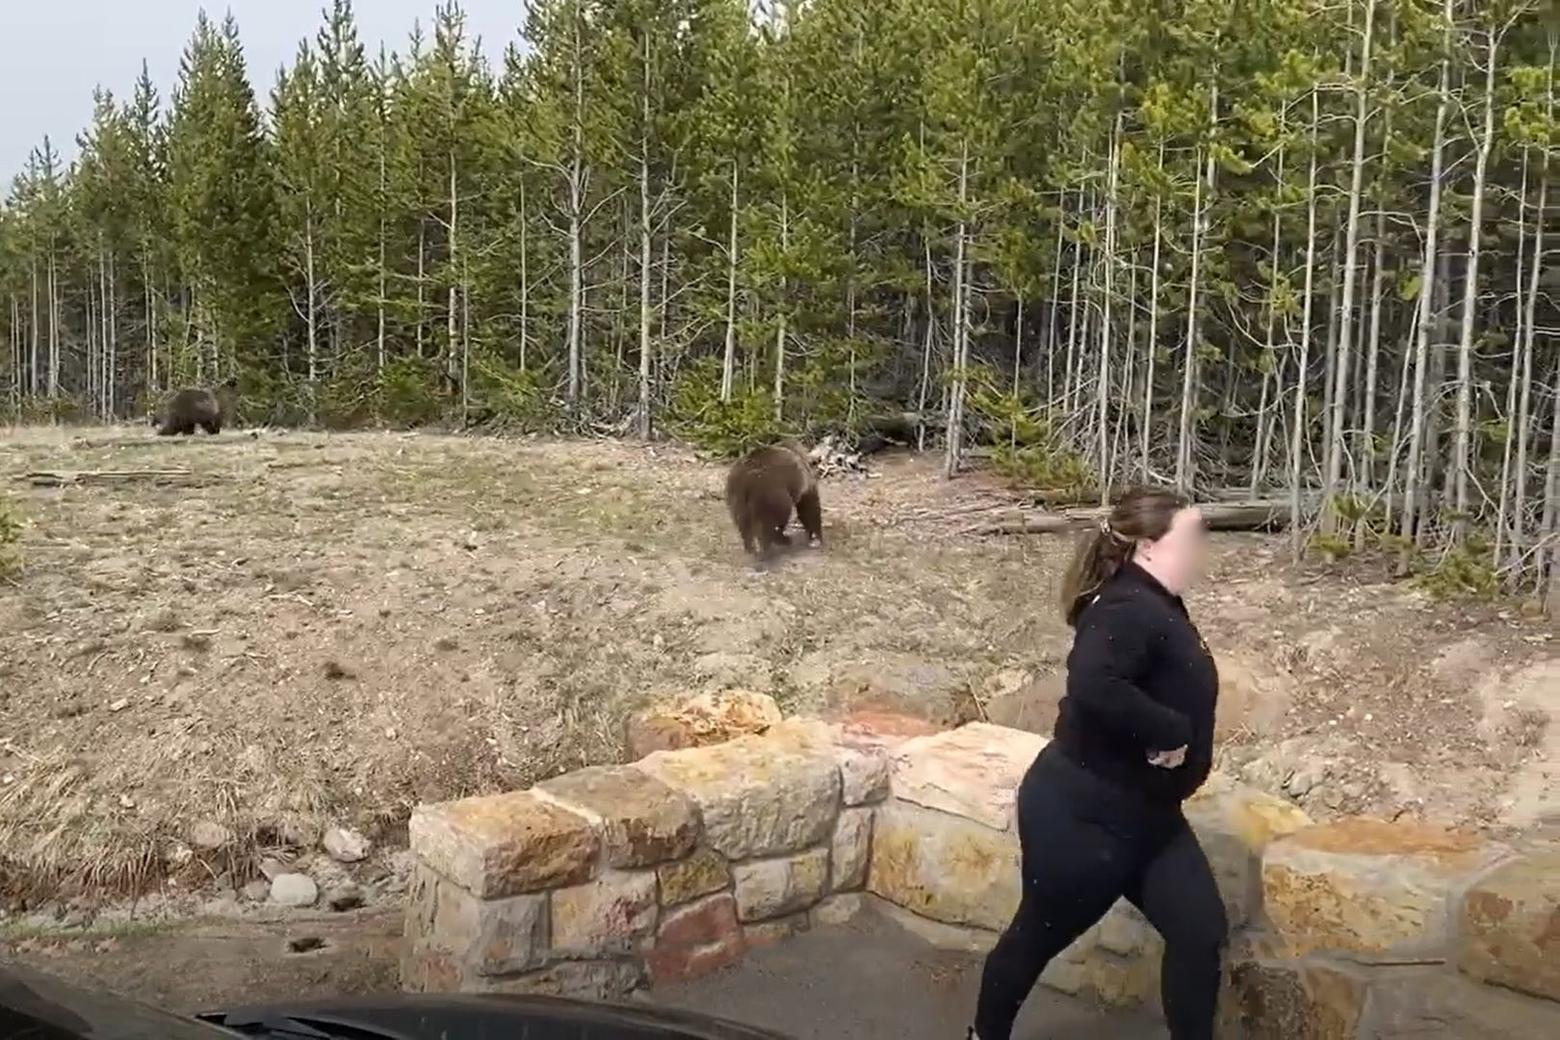 This Yellowstone tourist, who moved too close to a mother grizzly and cubs, darts away after the adult bear made a bluff charge. The 25-year-old visitor from Carol Stream, Illinois, was banned from Yellowstone and required to pay more than $2,000 in fines. Photo courtesy Yellowstone Facebook page/Darcie Addington